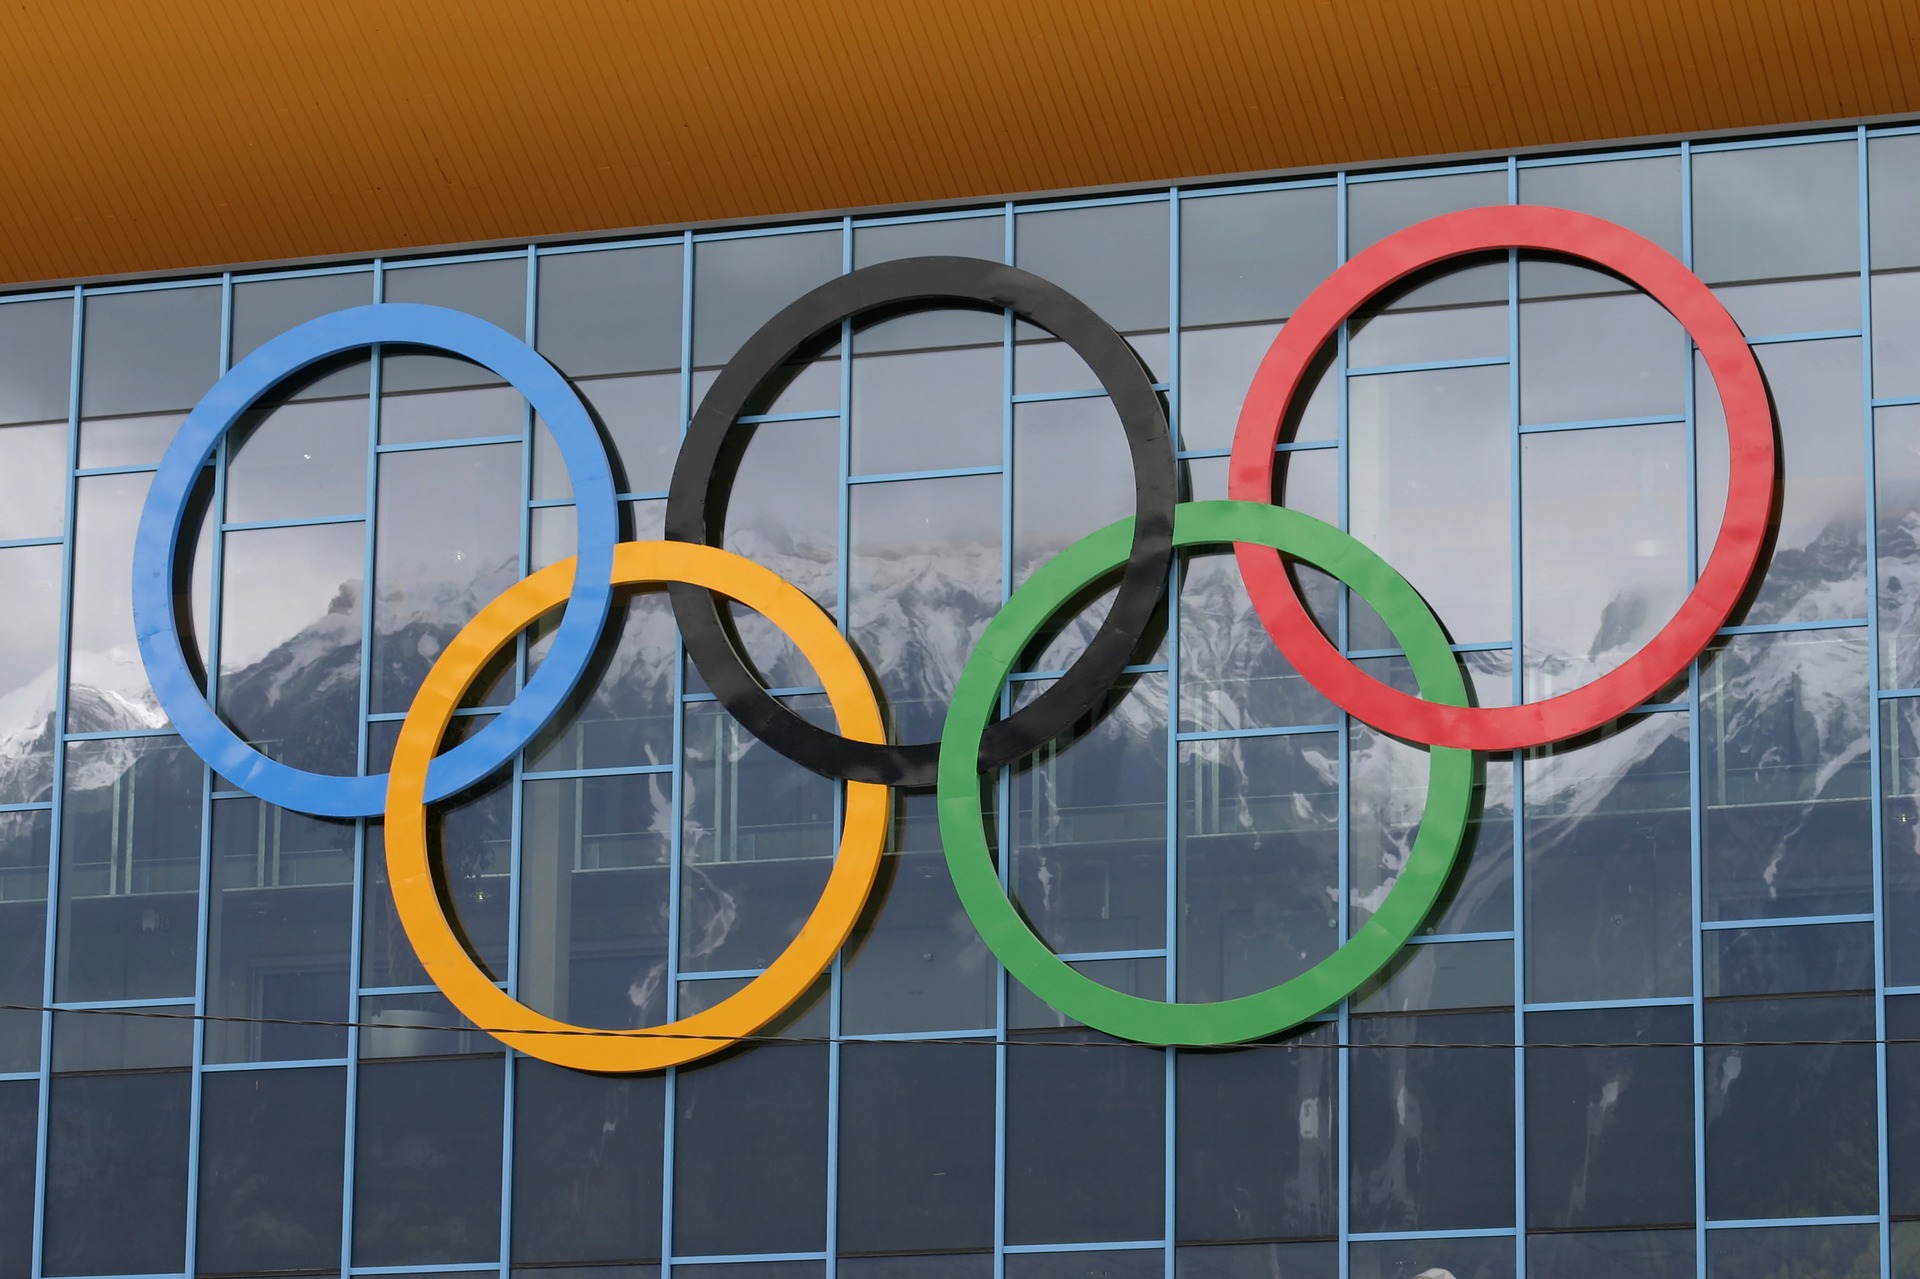 News: Journalist That Outed Olympians Apologizes